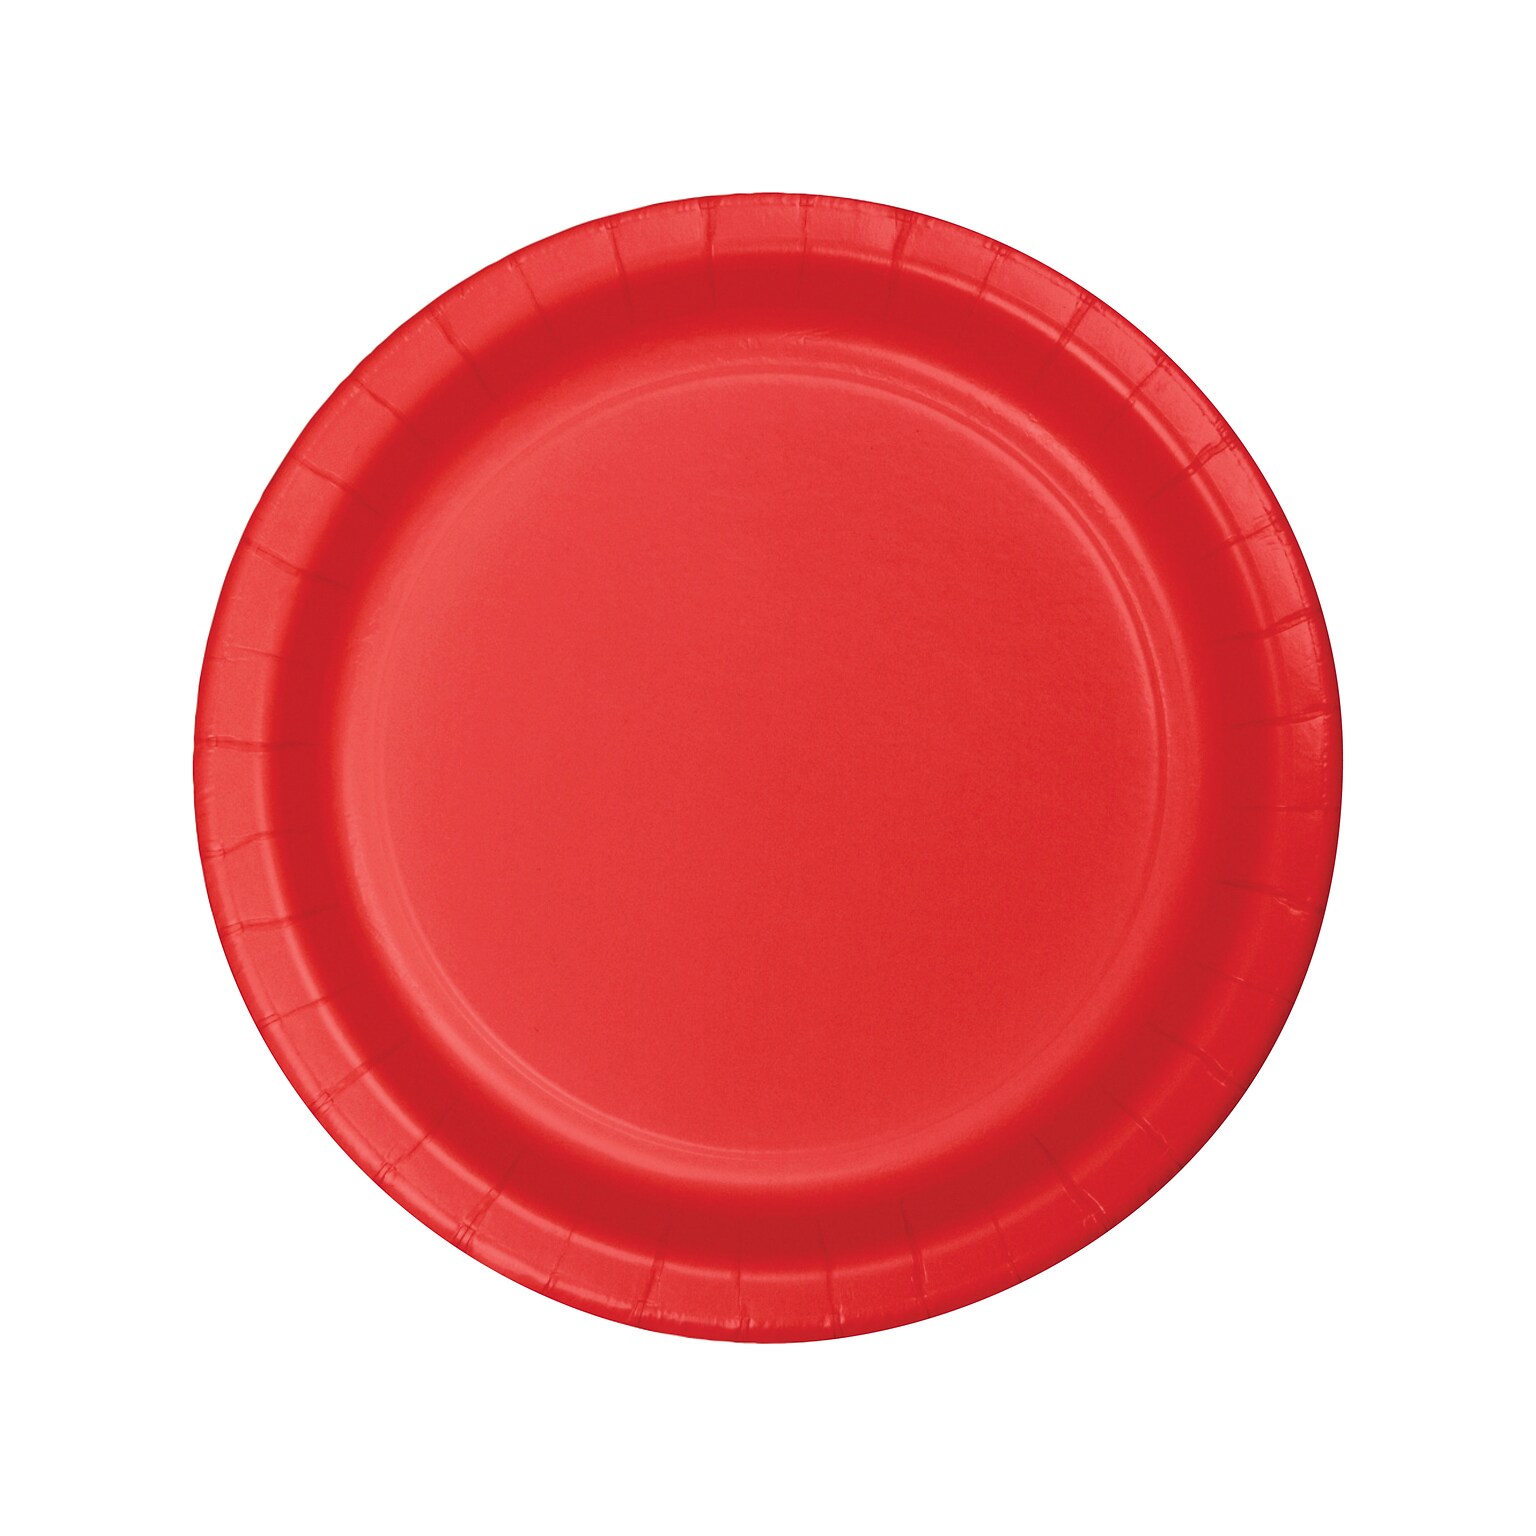 Creative Converting Touch of Color 9 Paper Dinner Plate, Classic Red, 72 Plates/Pack (DTC471031BDPLT)